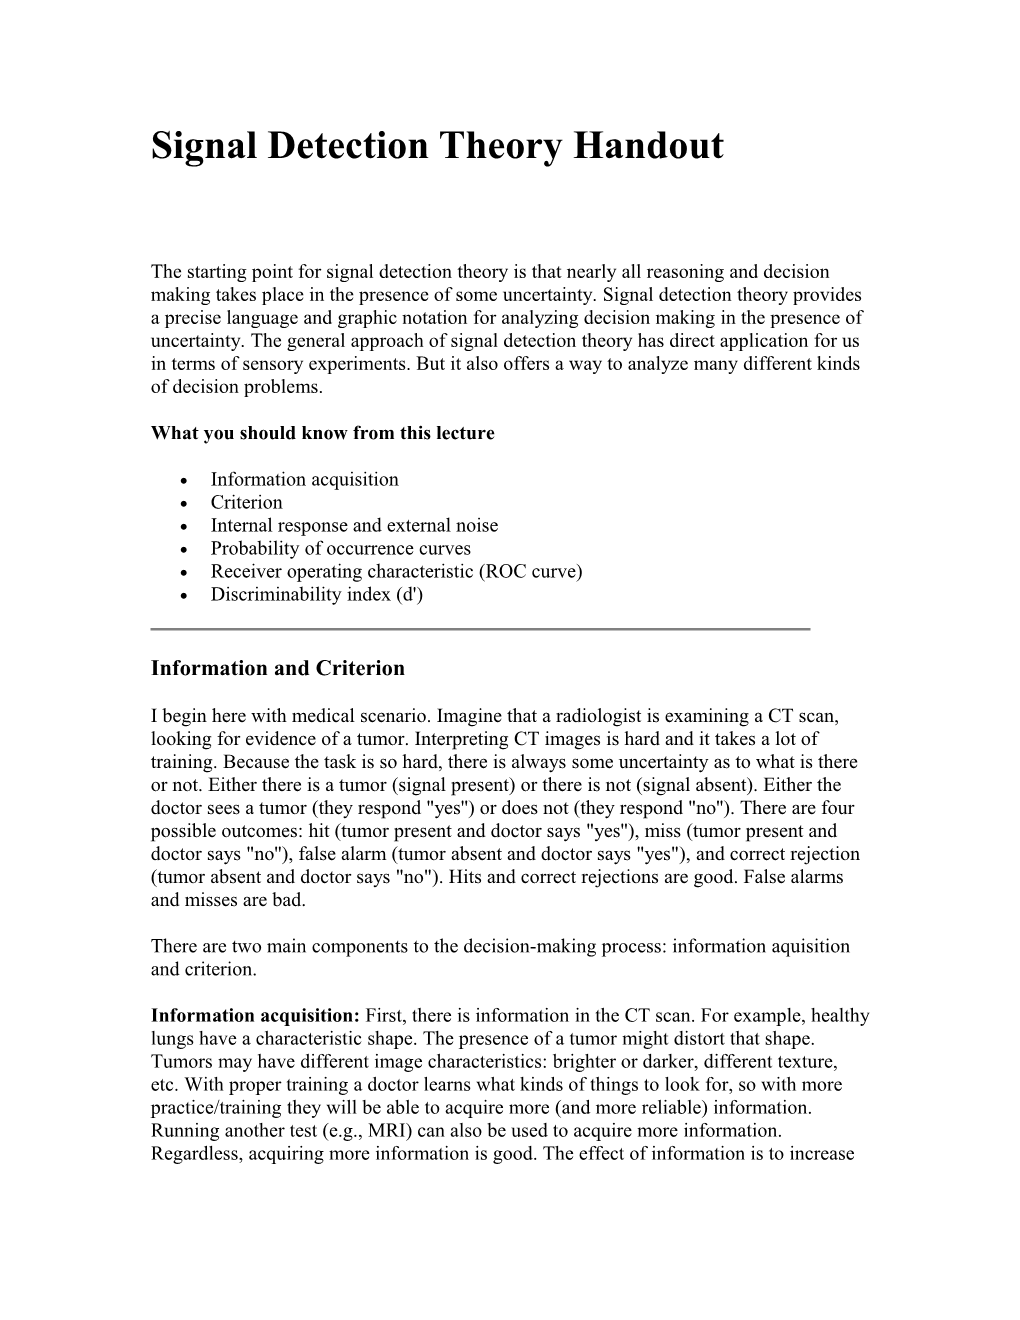 Signal Detection Theory Handout (Psych 30)